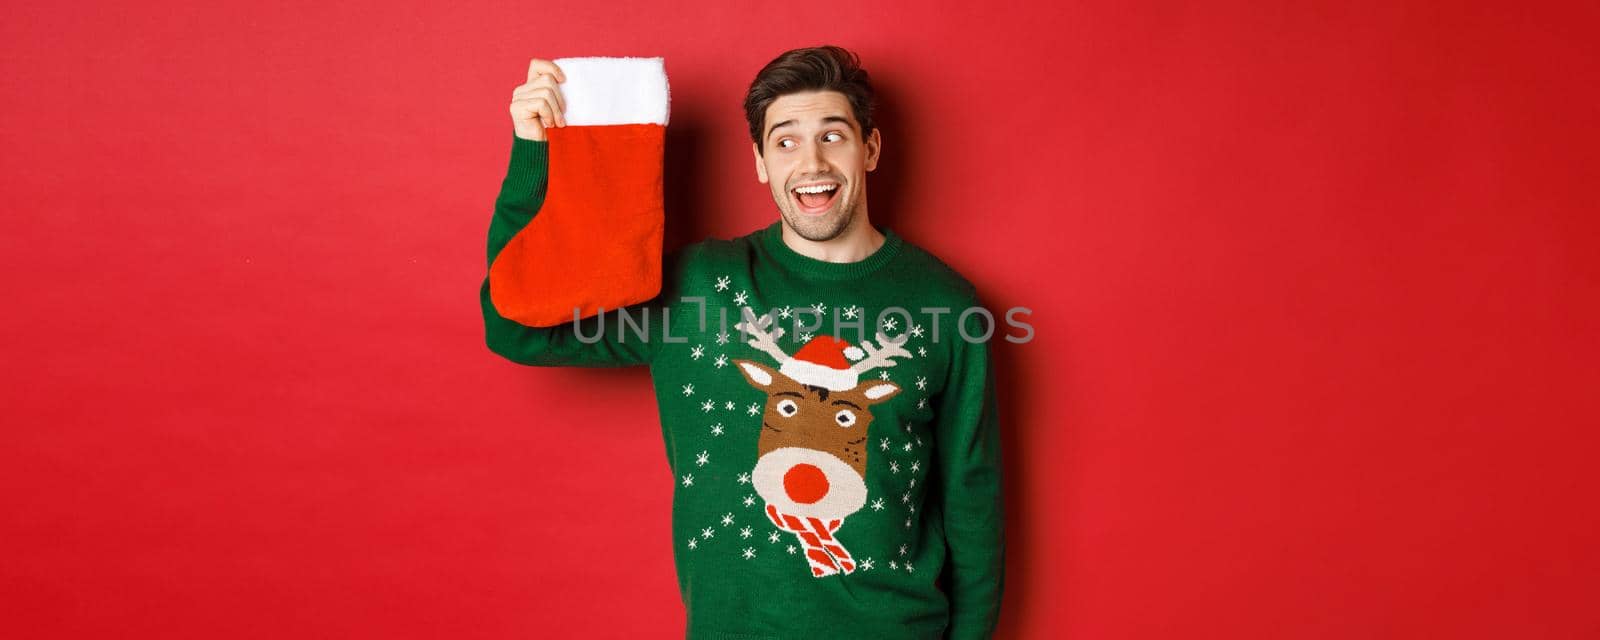 Image of surprised and amused man in green sweater, looking at christmas stocking with presents and smiling, standing over red background.